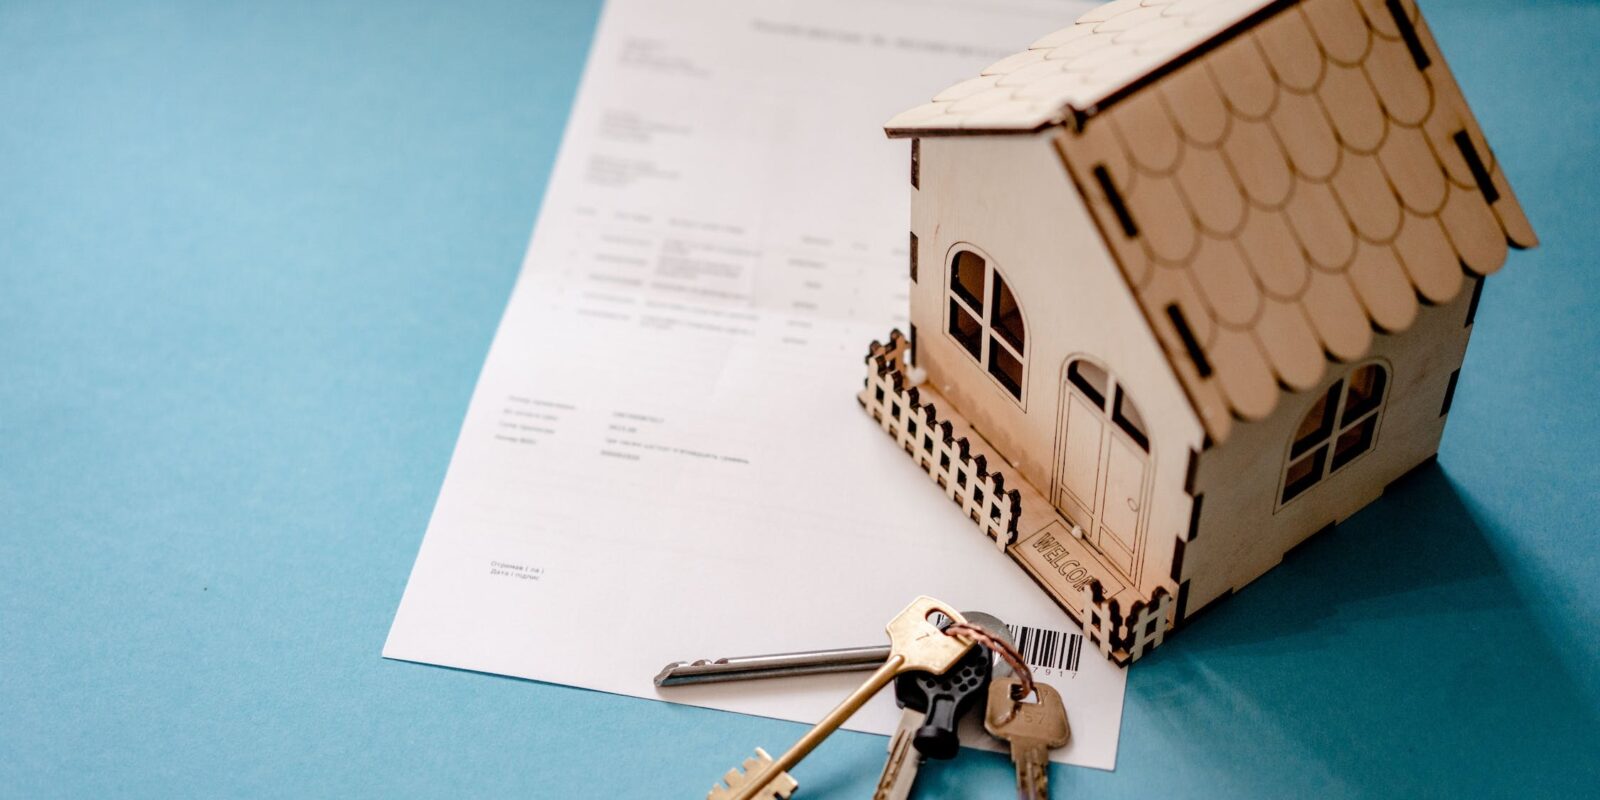 A miniature house and keys over a contract, symbolising the need for negotiation strategies for securing the ideal lease